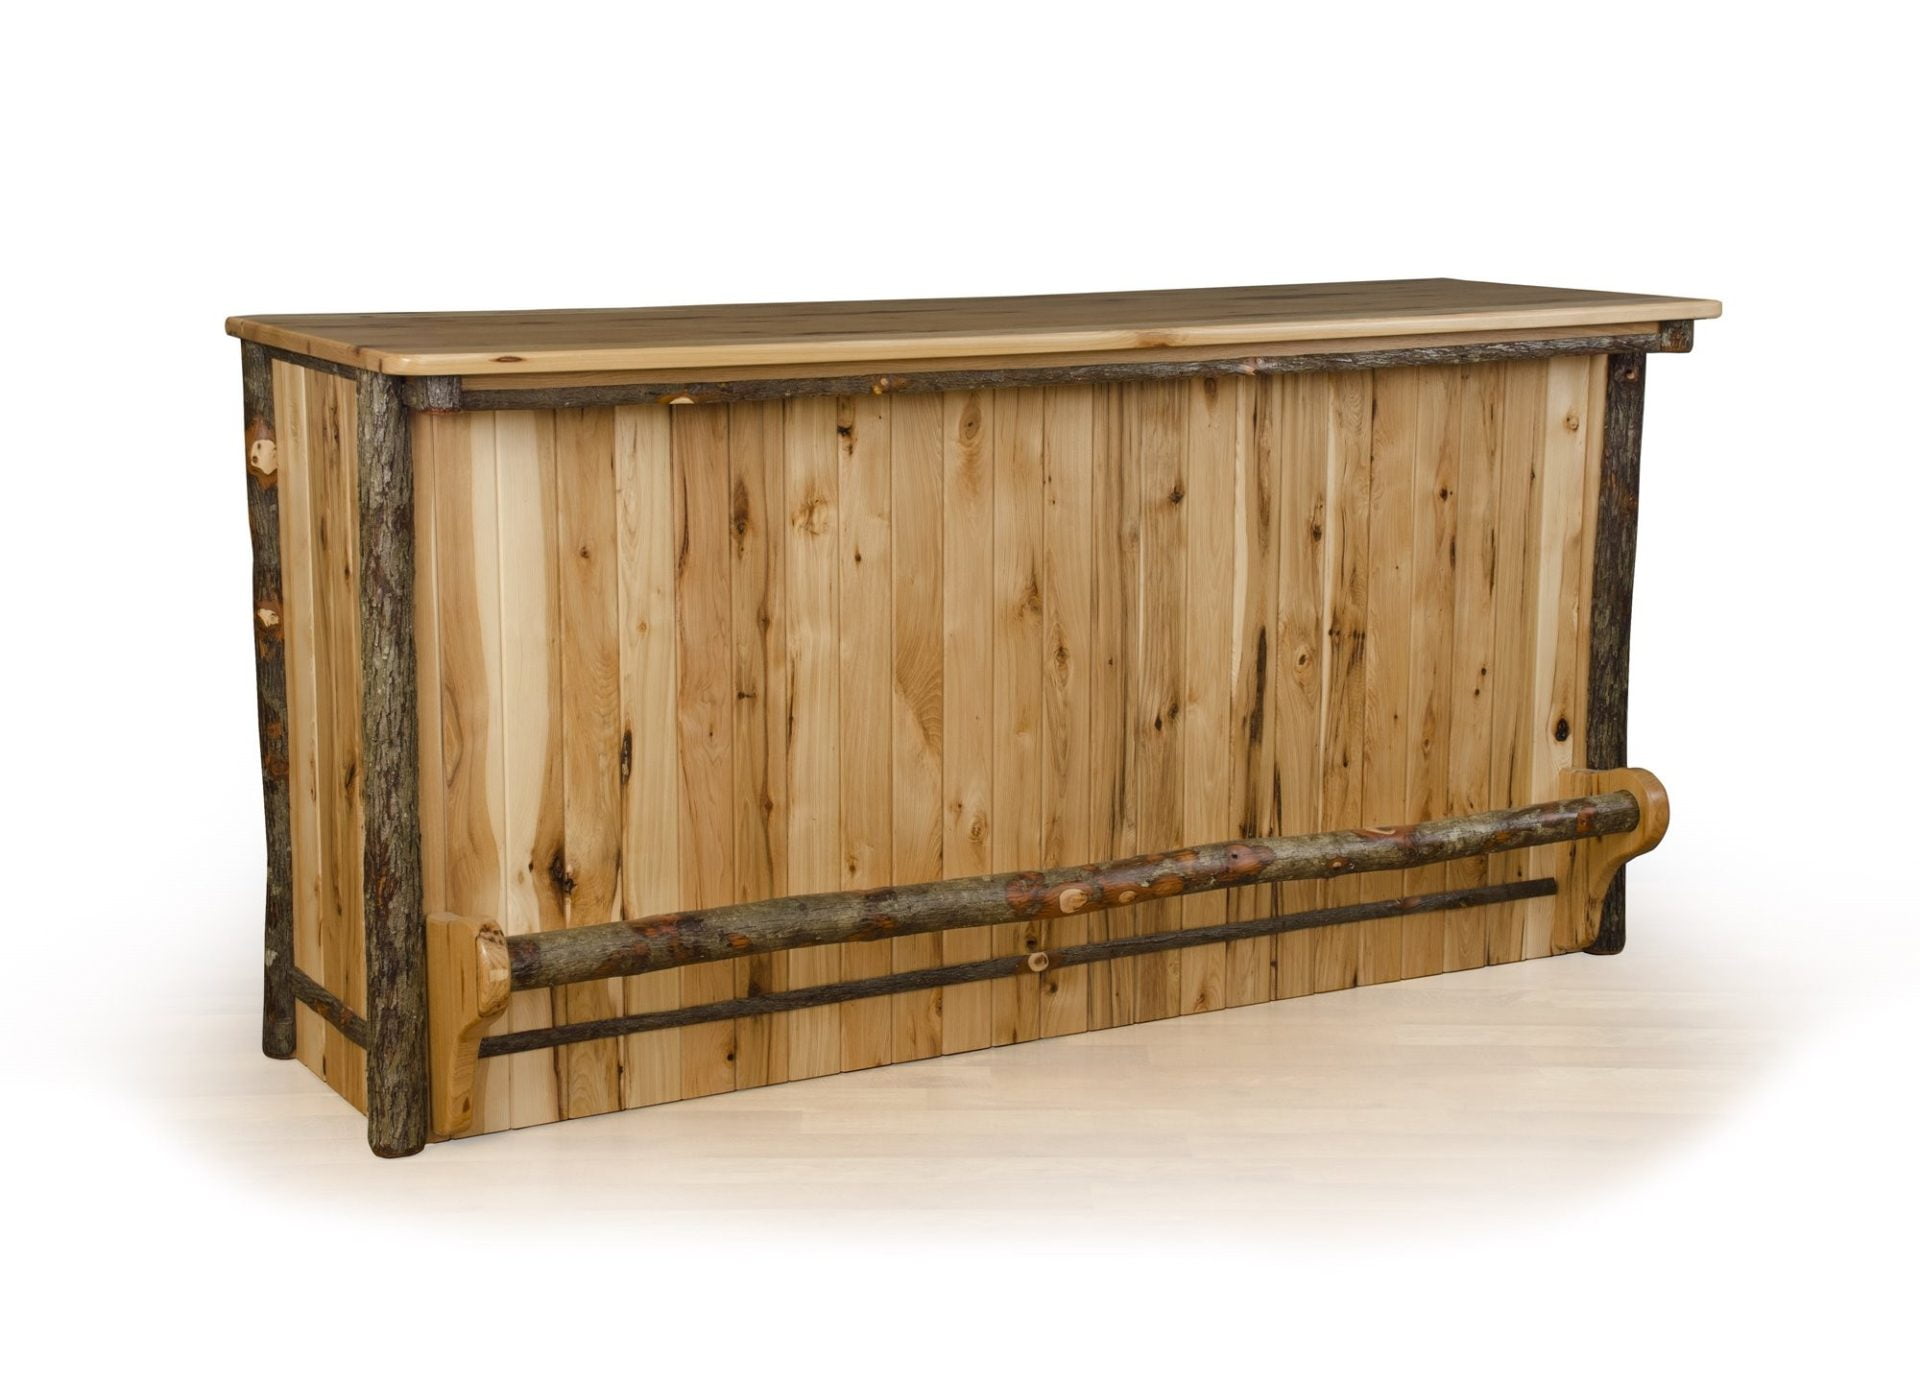 Rustic Hickory 5 Foot Bar with Foot Rail